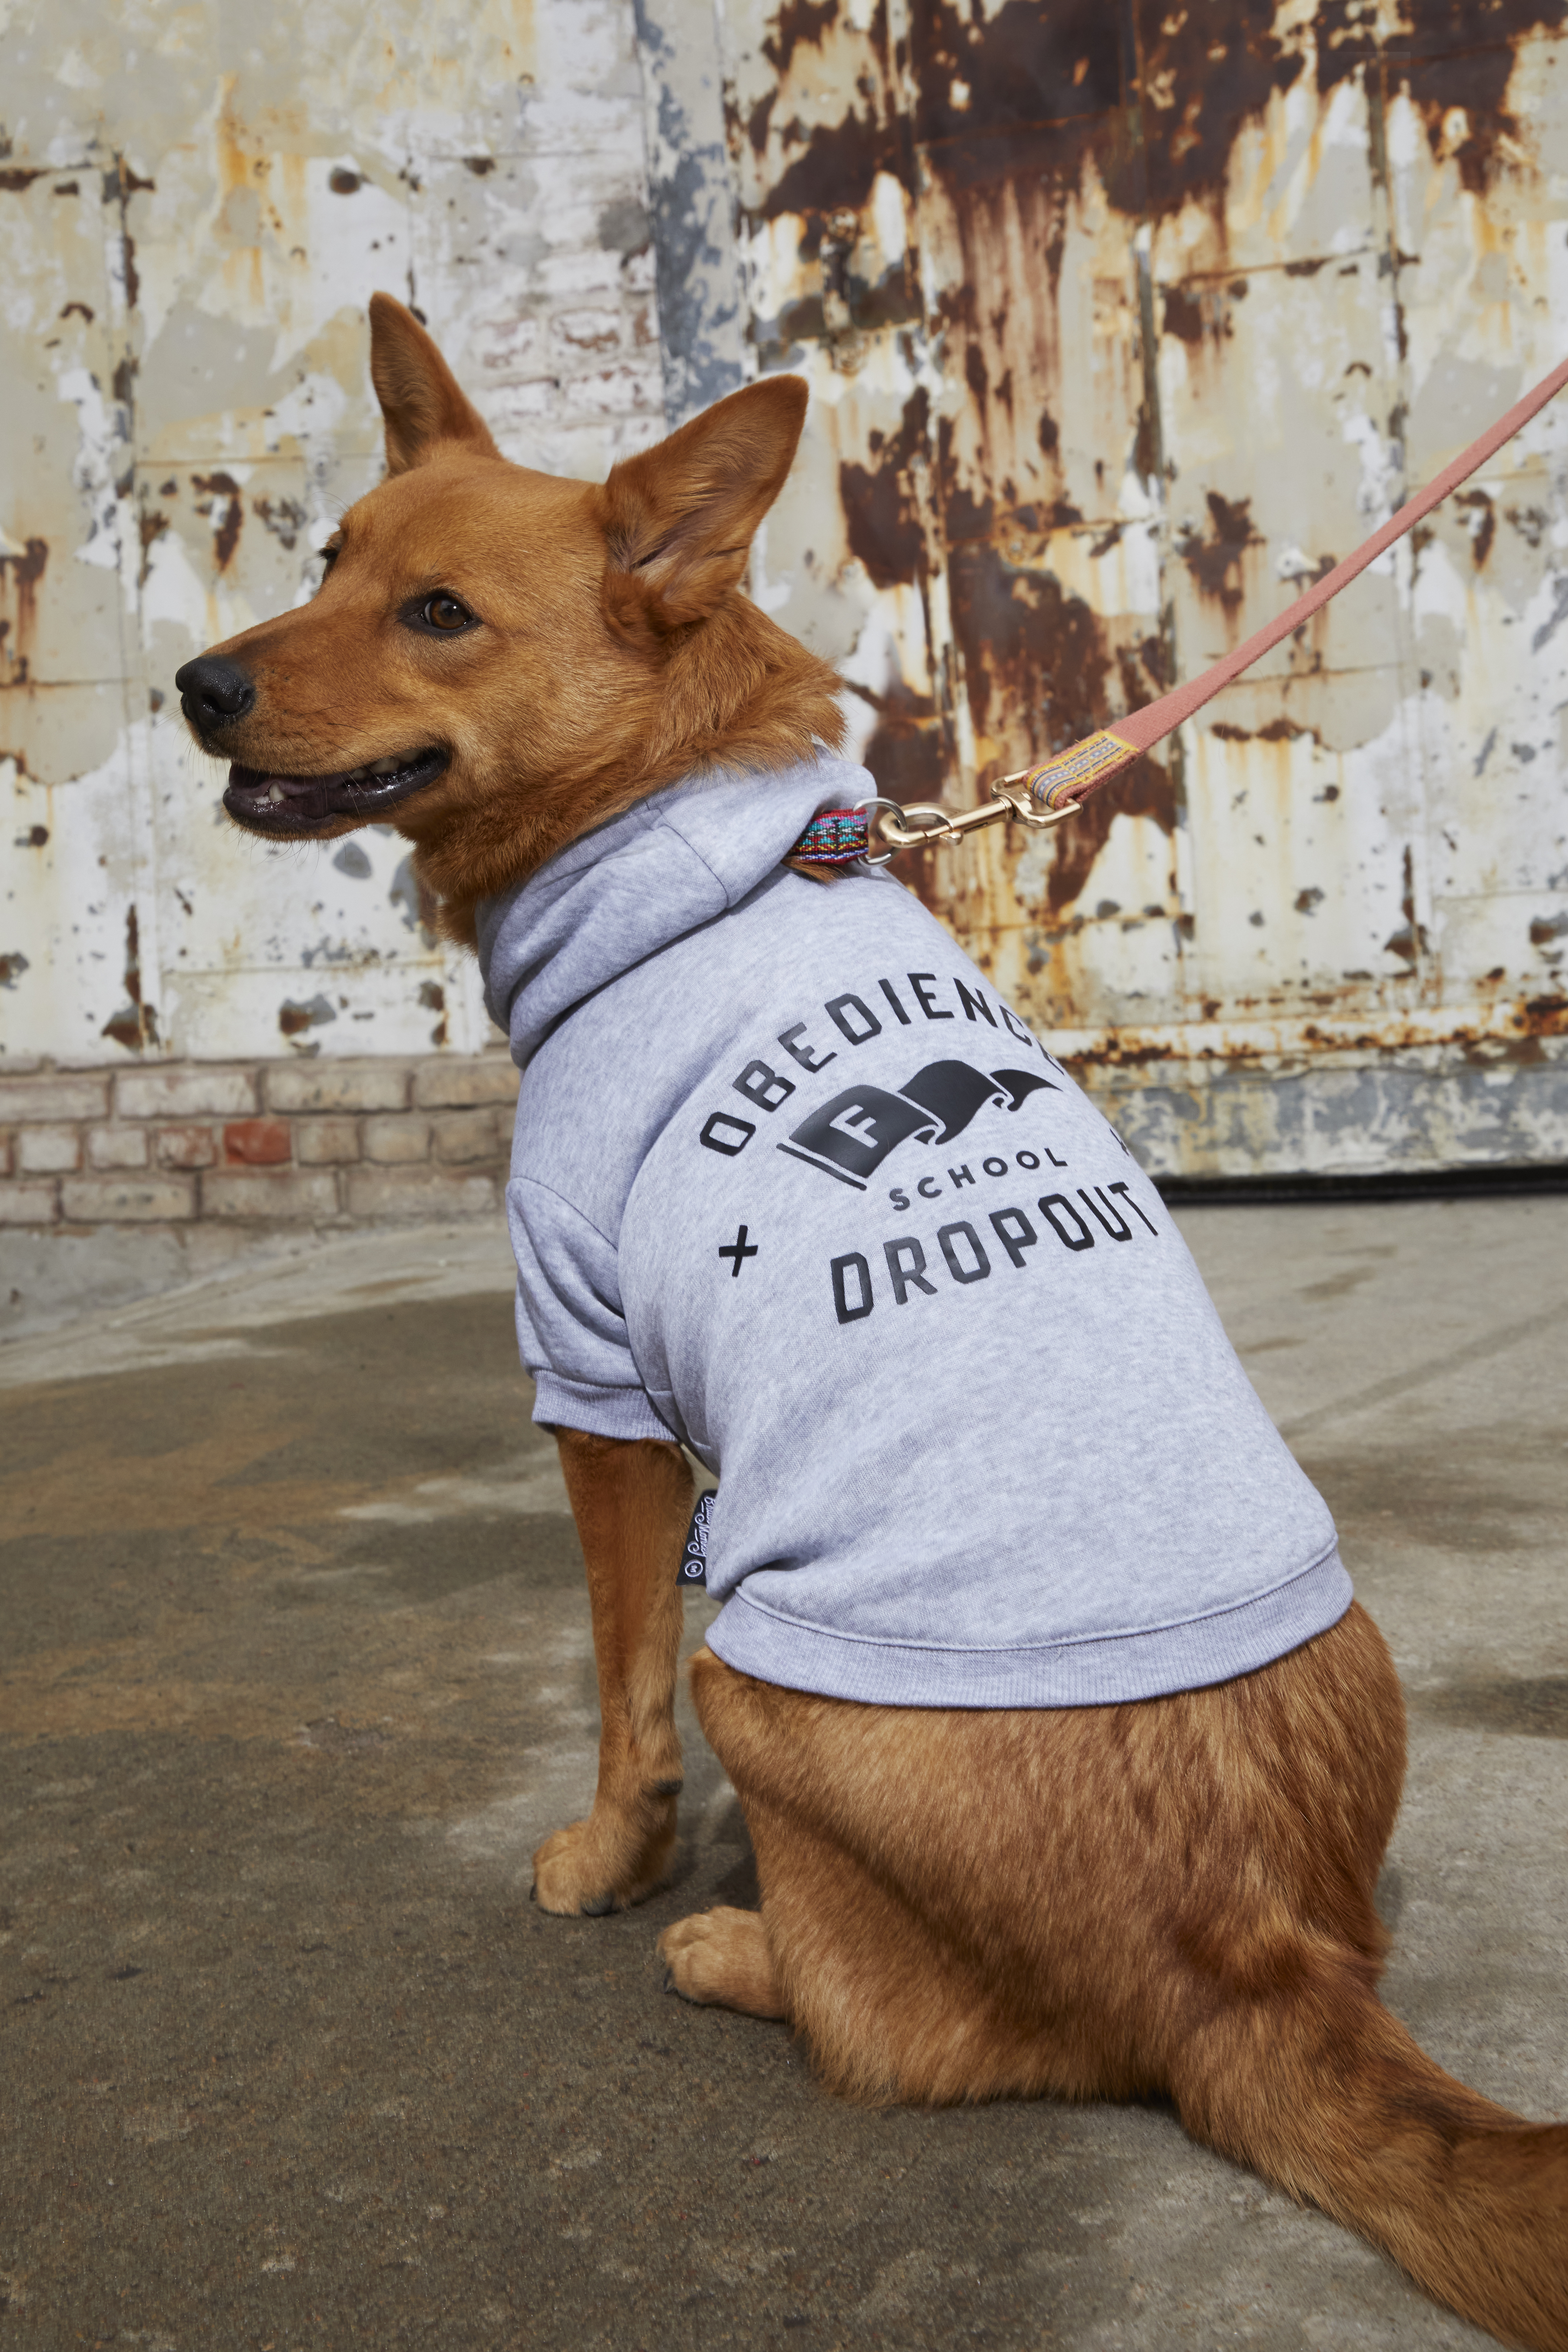 Obedience School Dropout Dog Hoodie - S